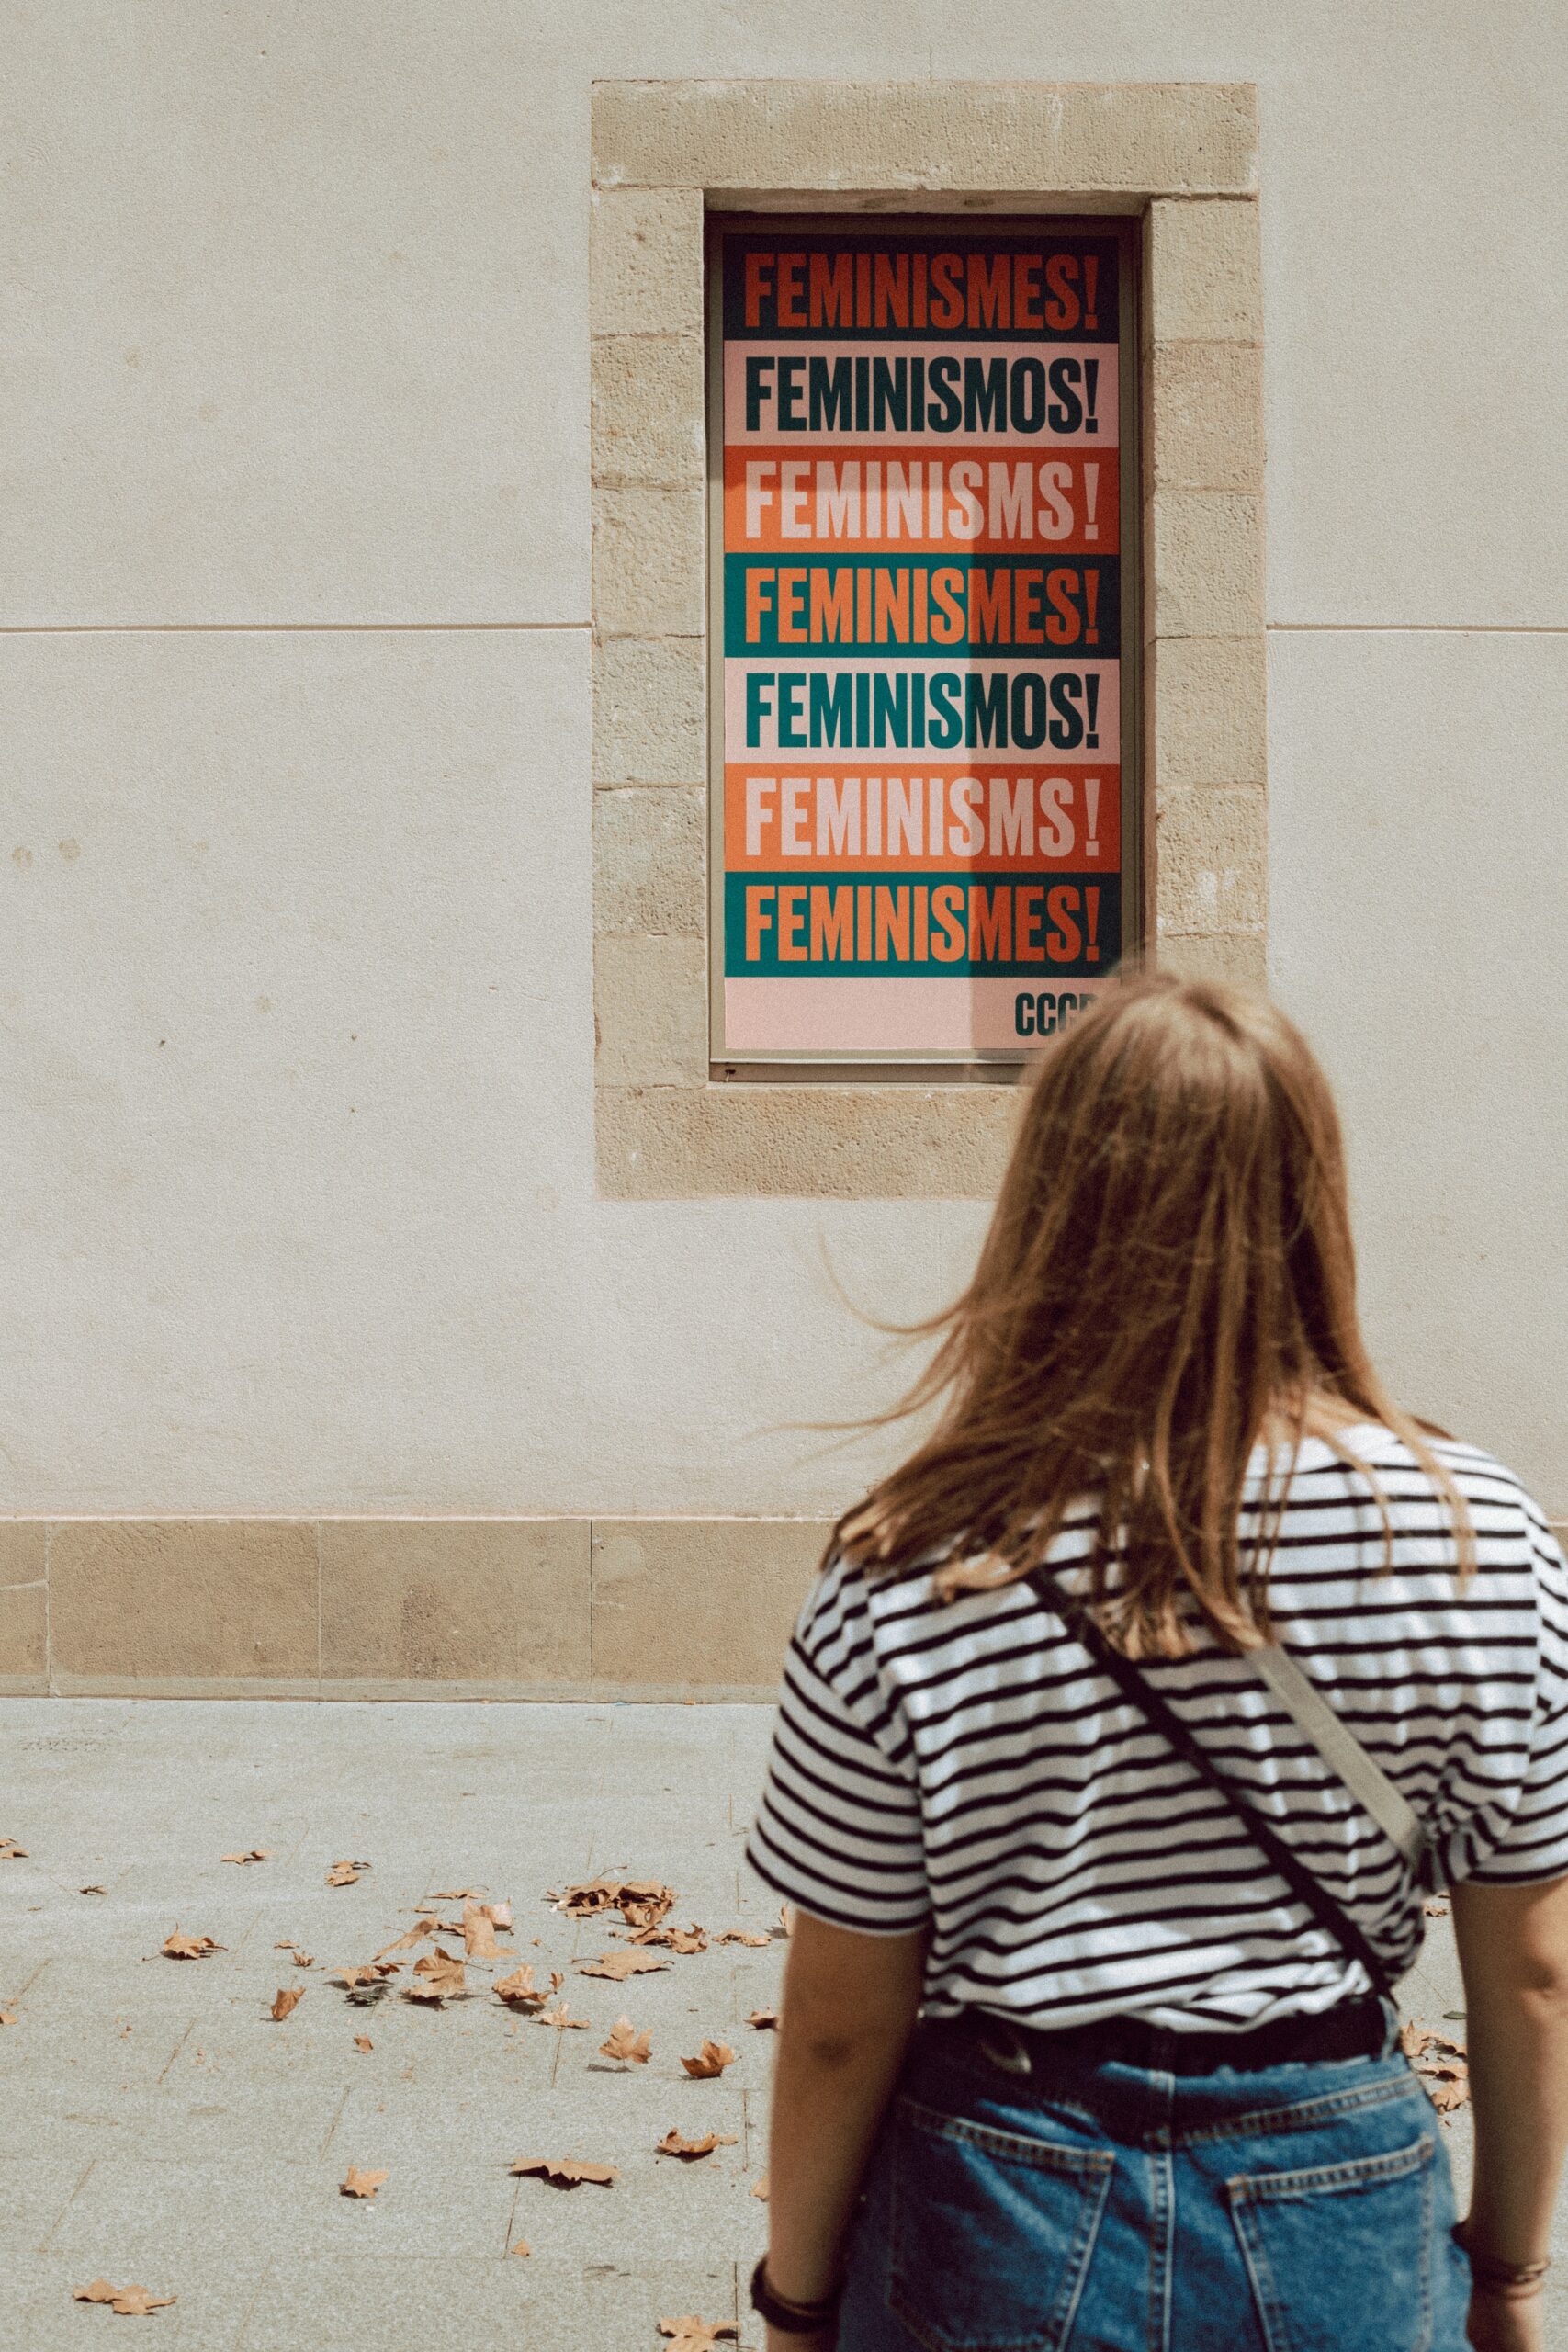 The way we think about feminism is problematic